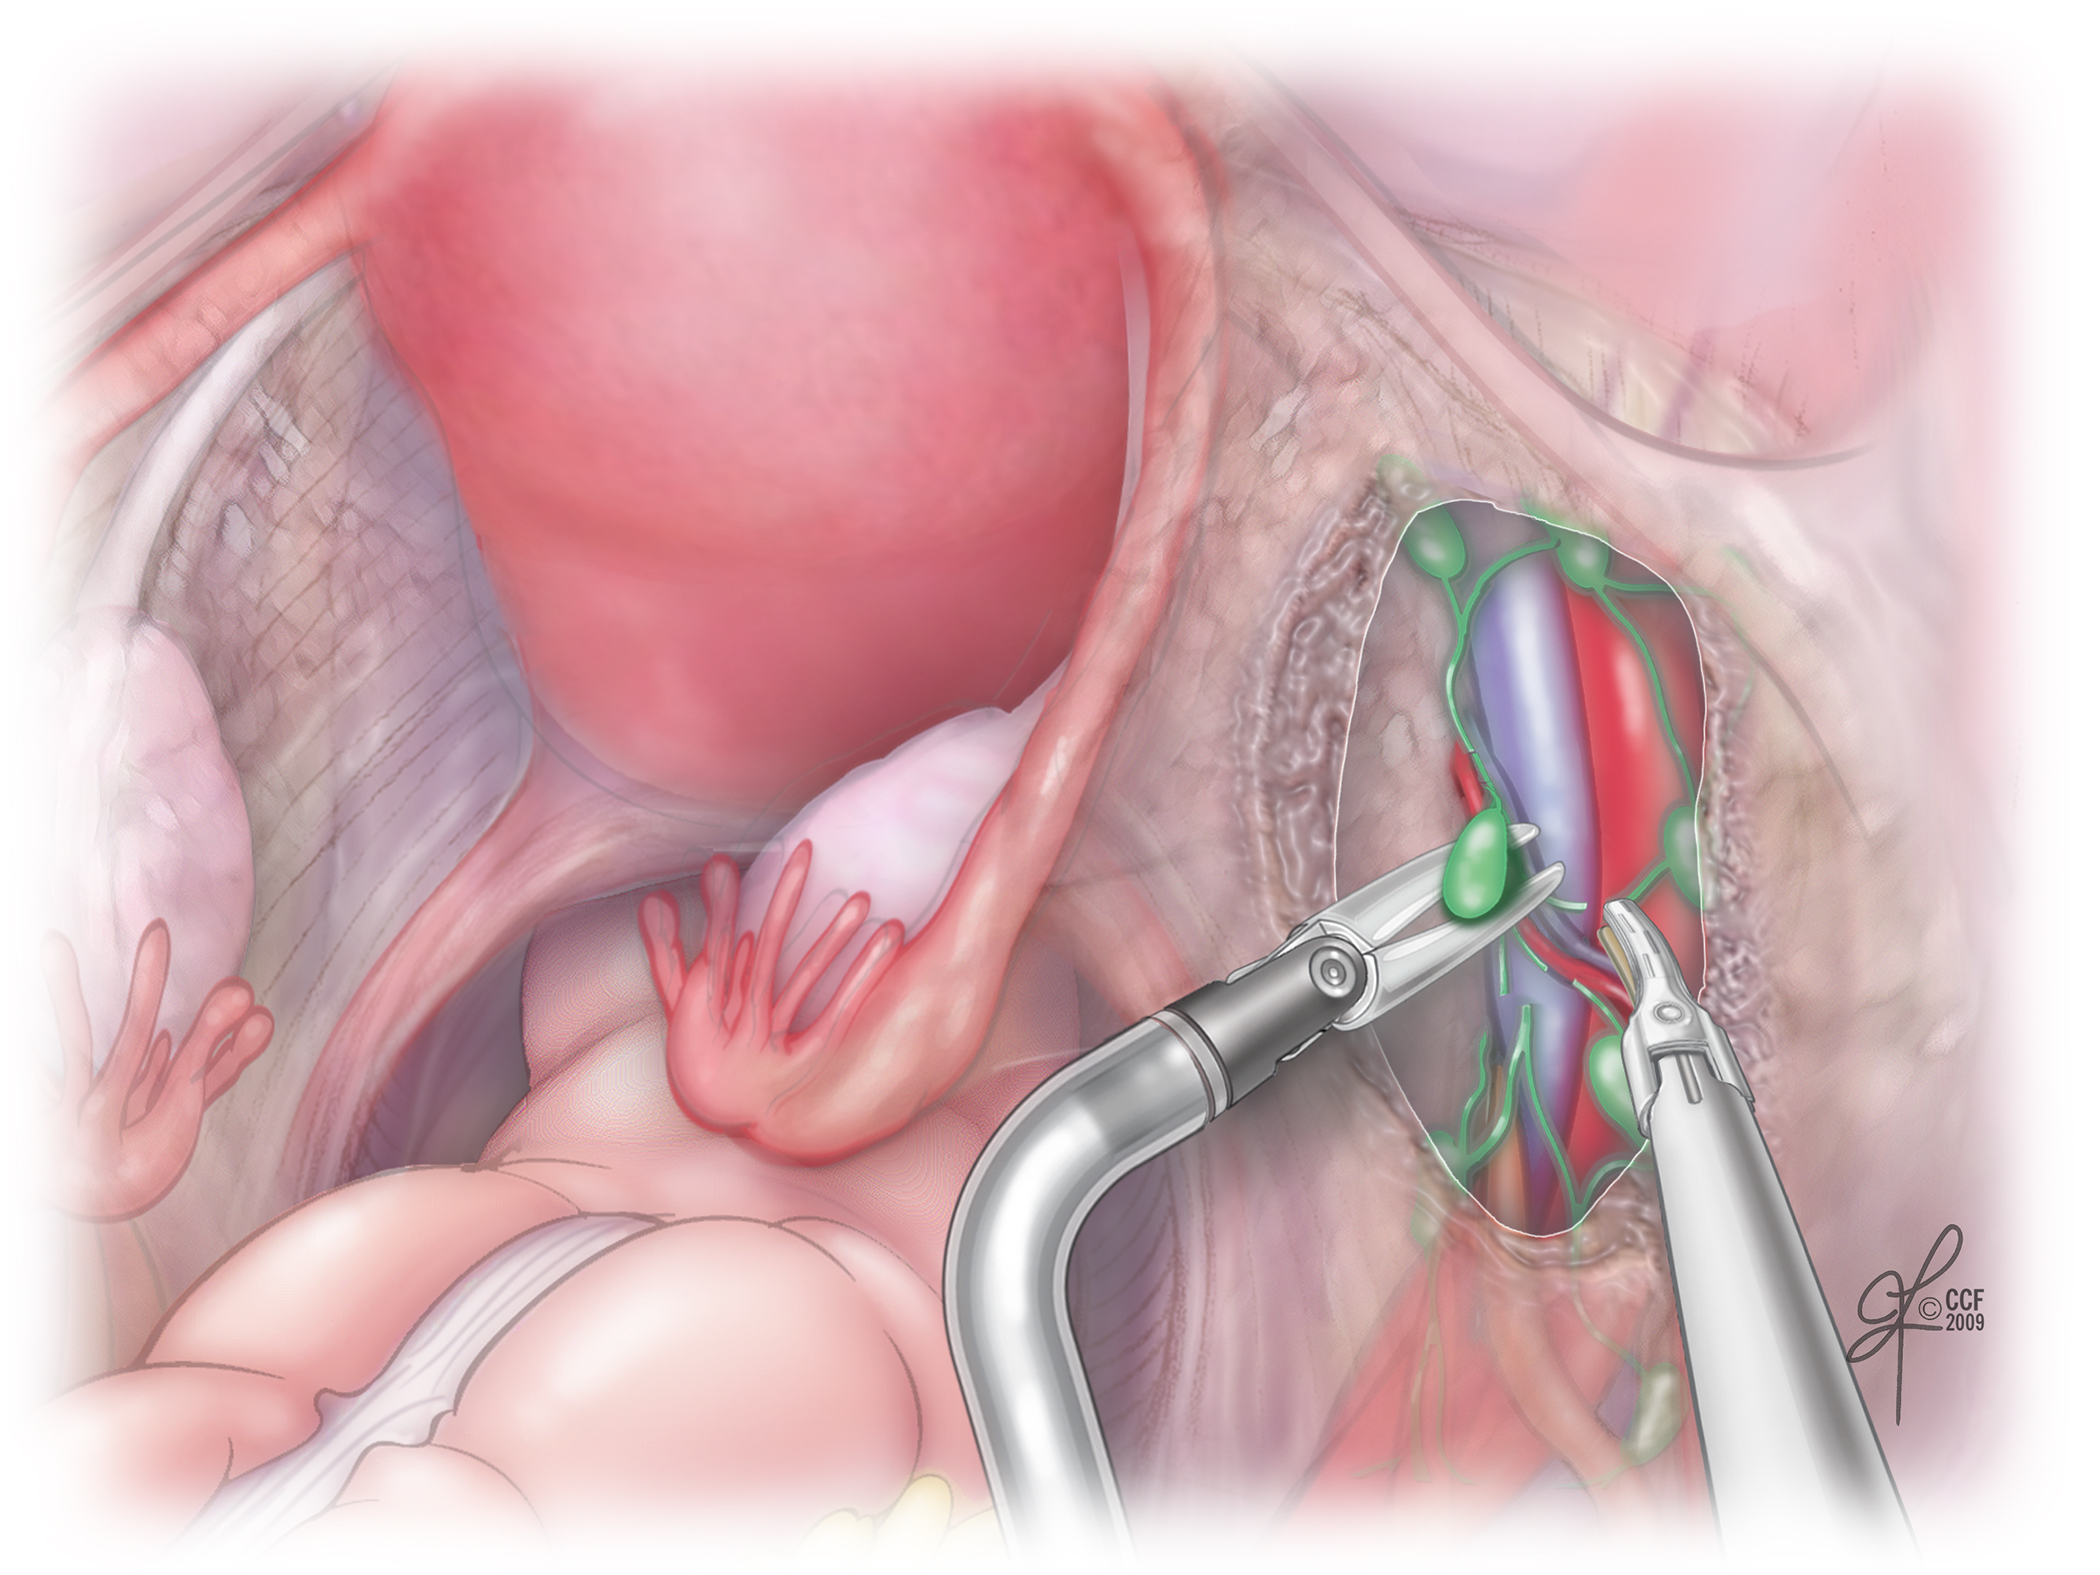 Figure 1: Pelvic lymph nodes are isolated and removed for endometrial cancer staging.